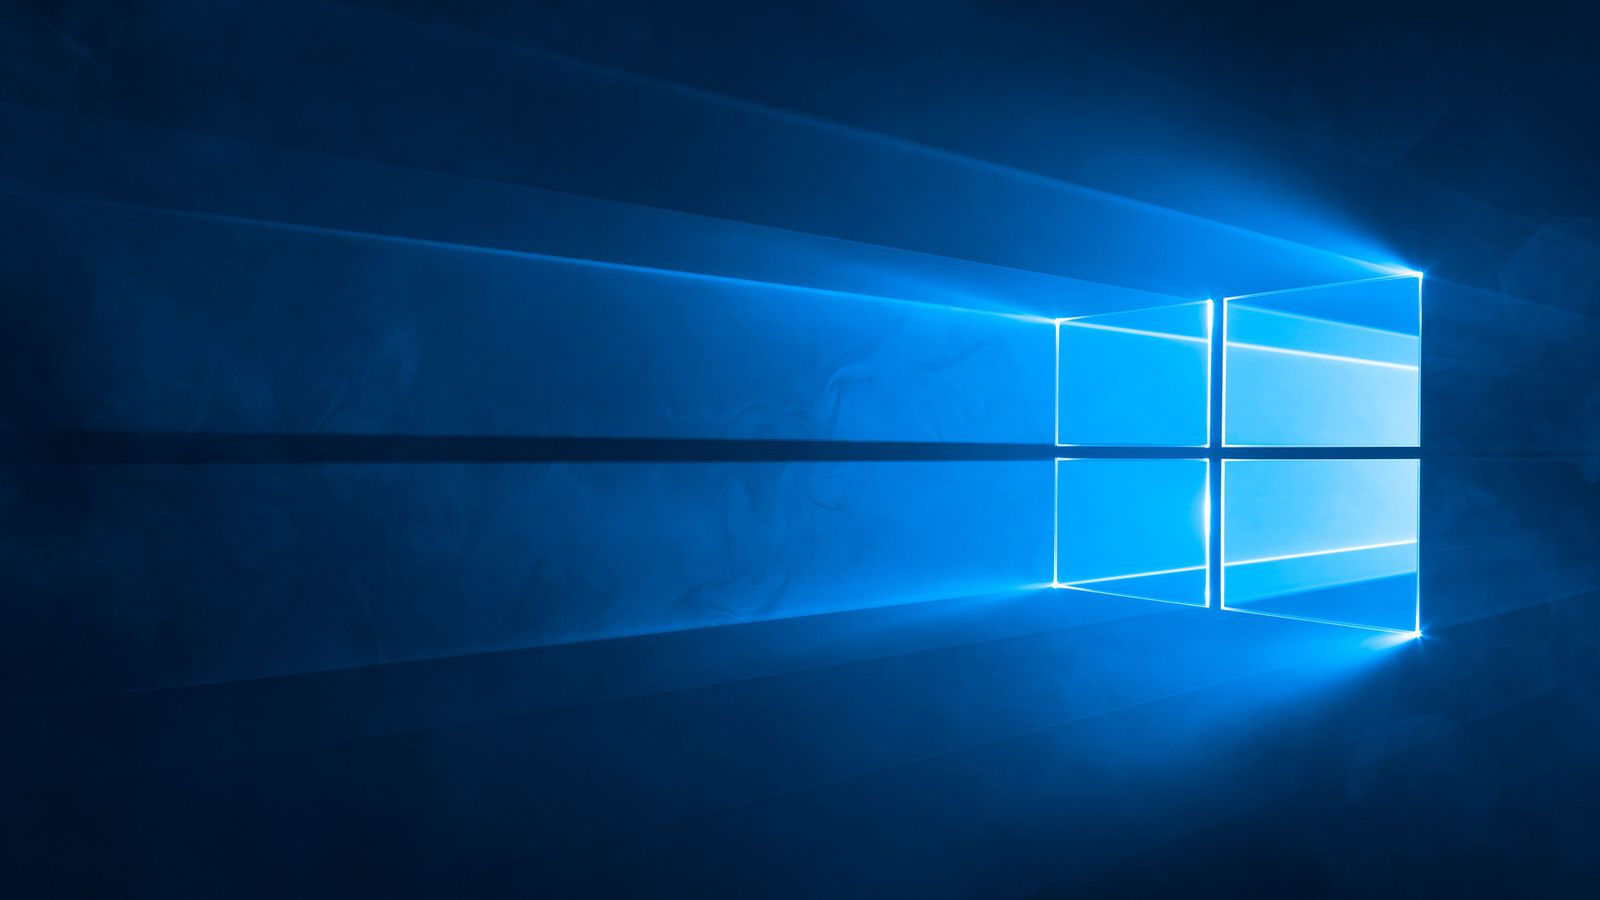 Latest Windows 10 Cumulative Update takes the OS to build 10240.18135 (changelog)